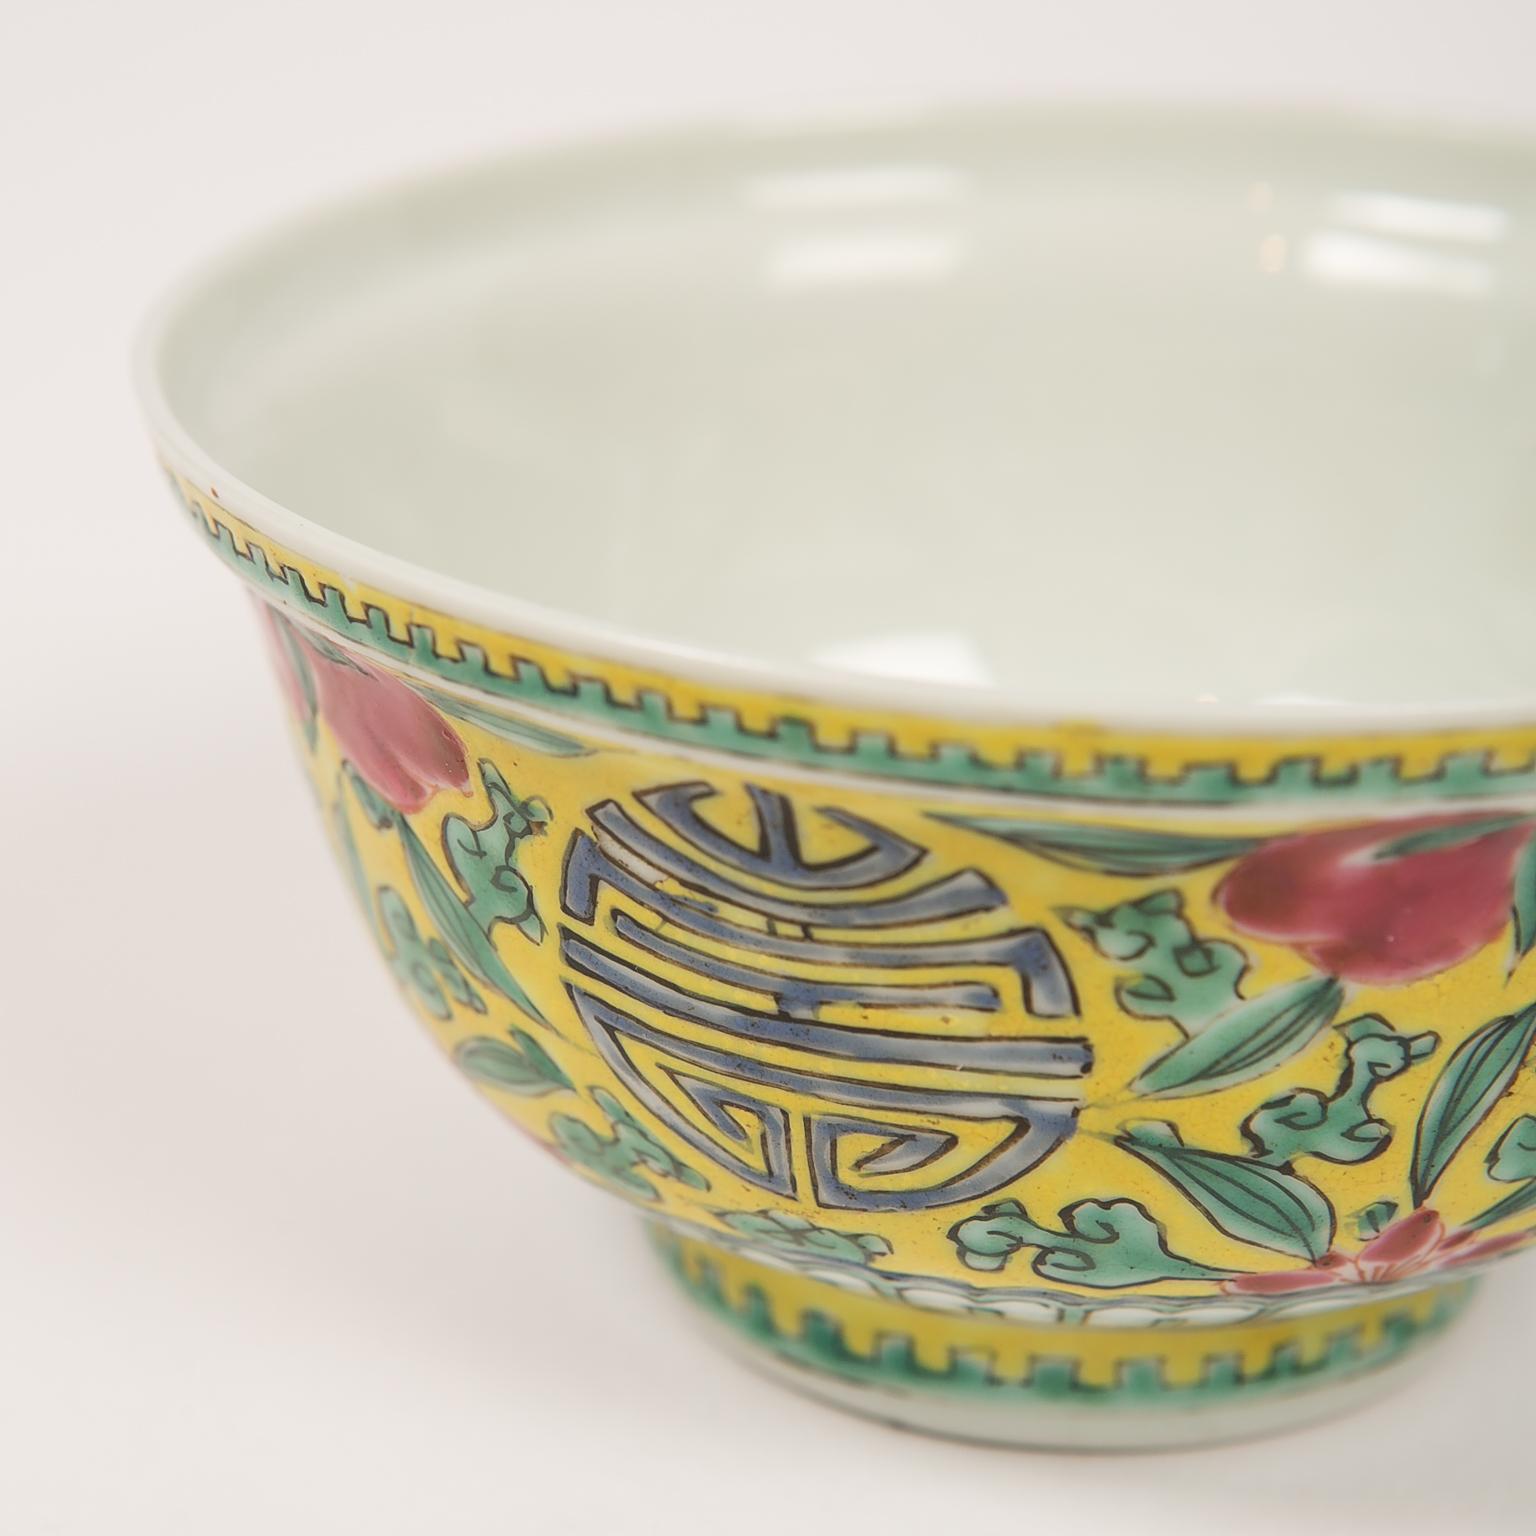 look at this image. how was this chinese bowl made